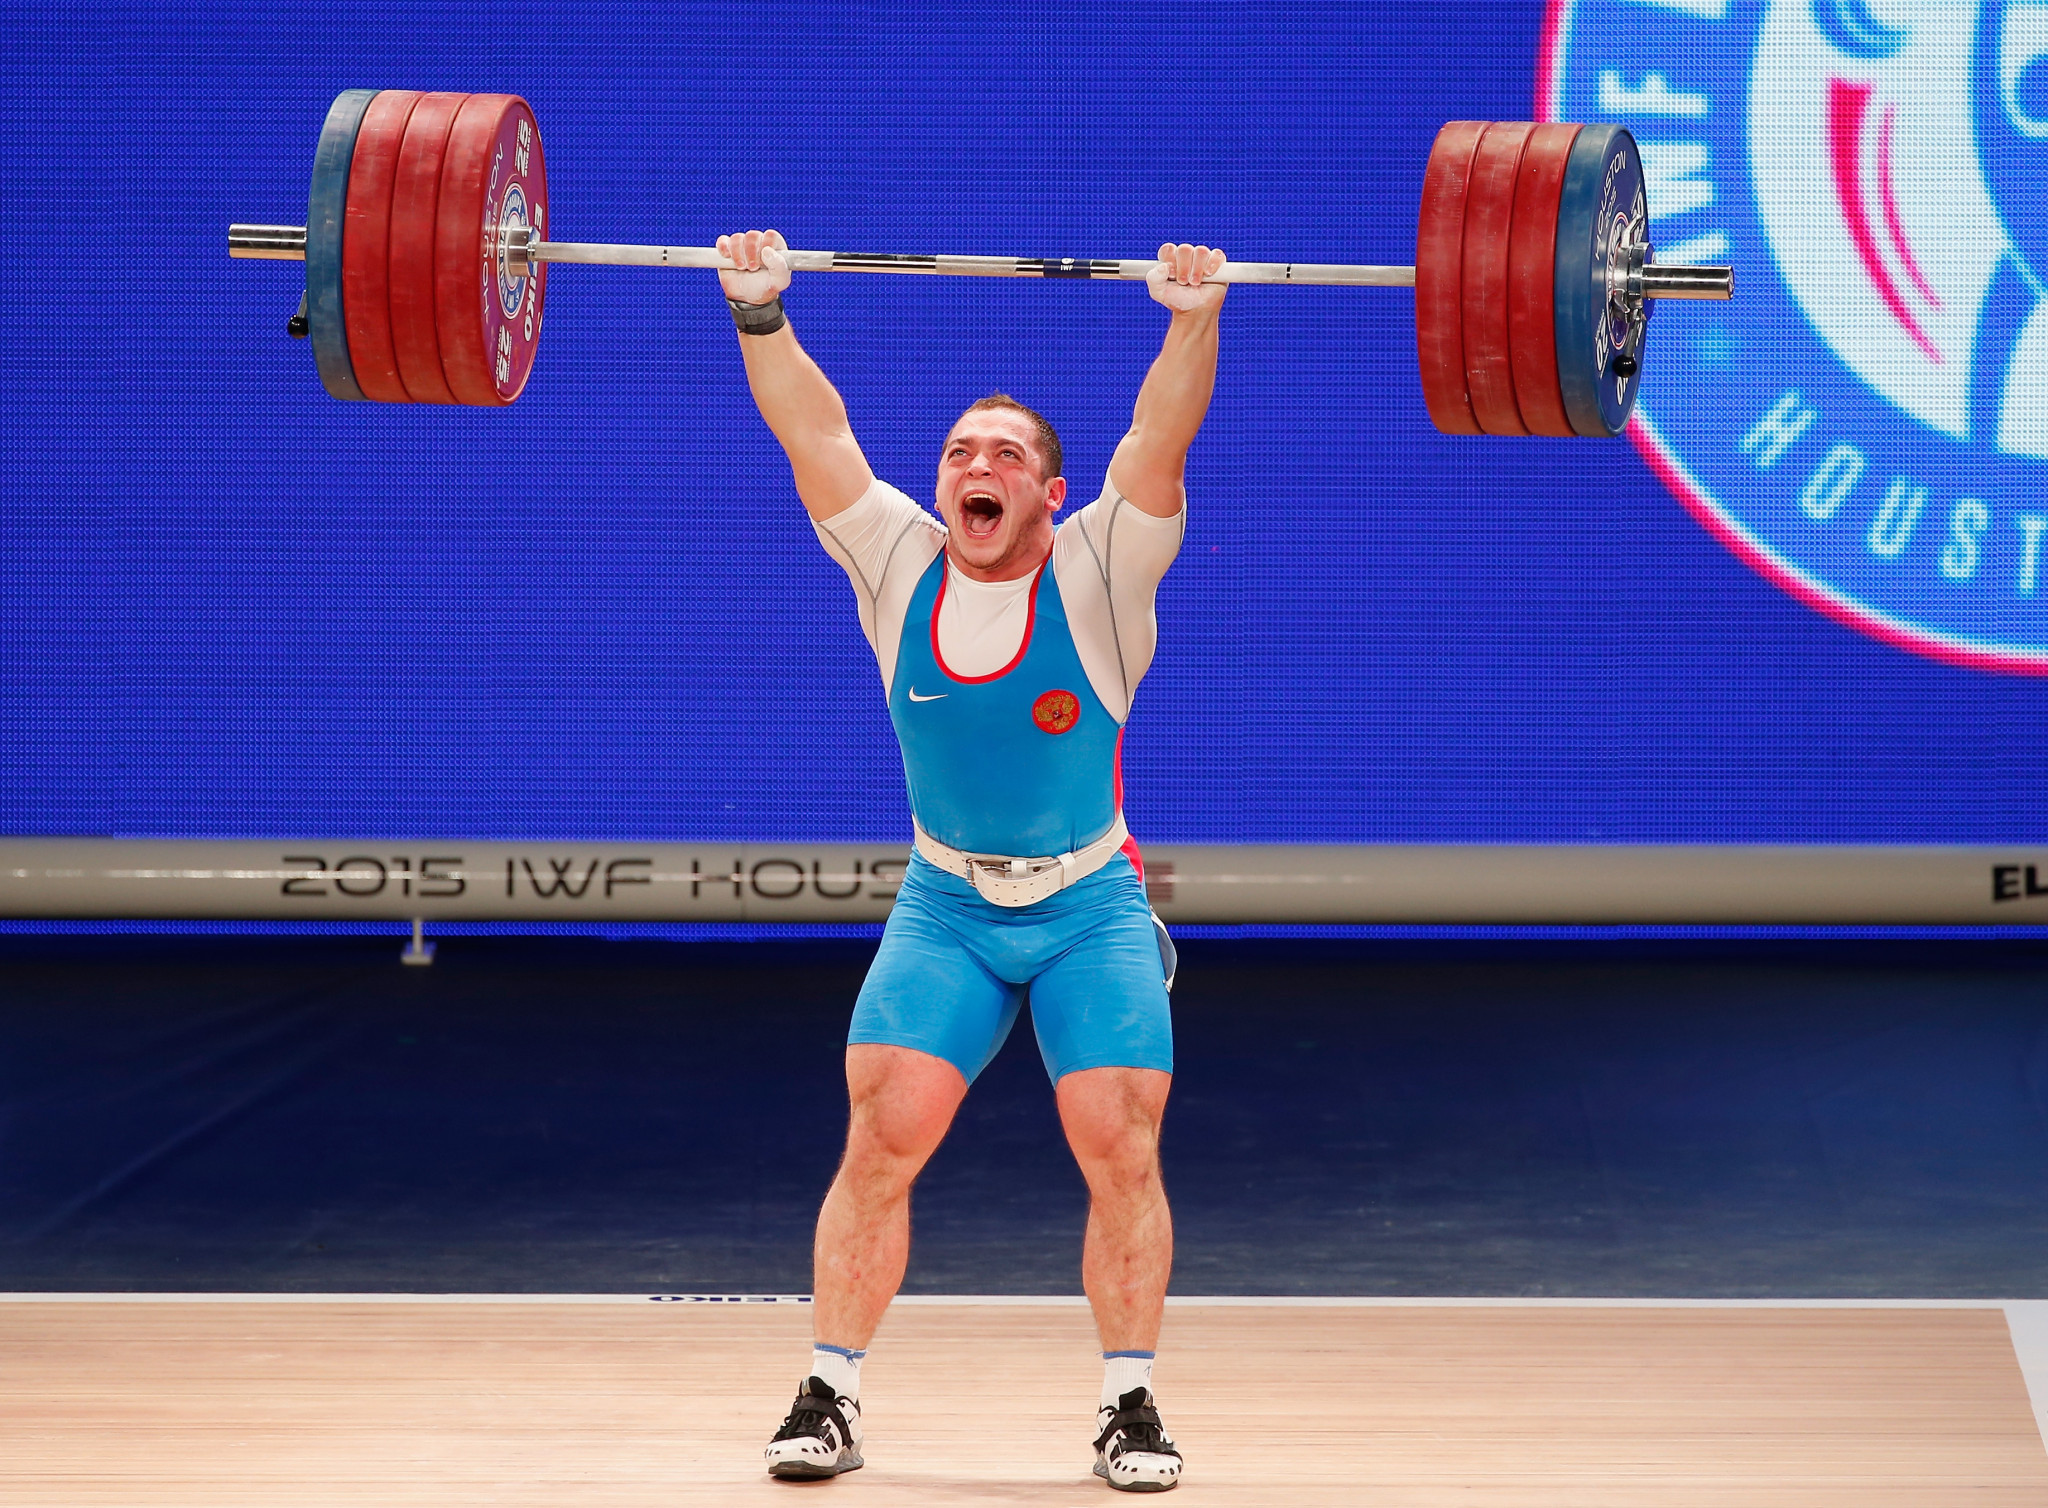 Artem Okulov was one of two Russian gold medallists at the recent IWF World Championships ©Getty Images